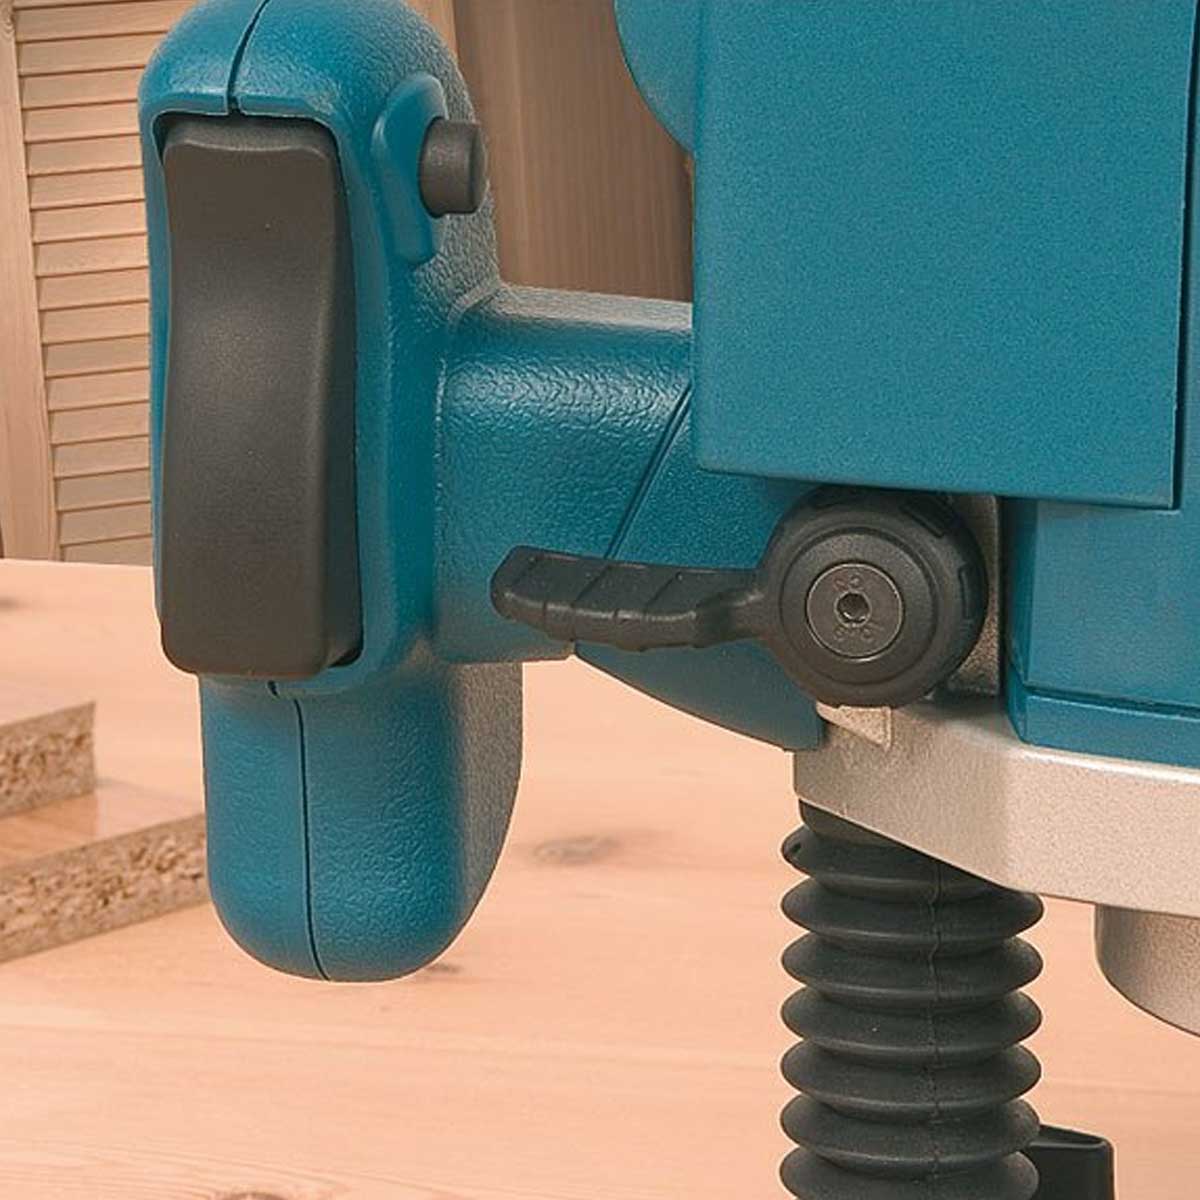 European Hand Router Manufacturers, Suppliers in Haryana